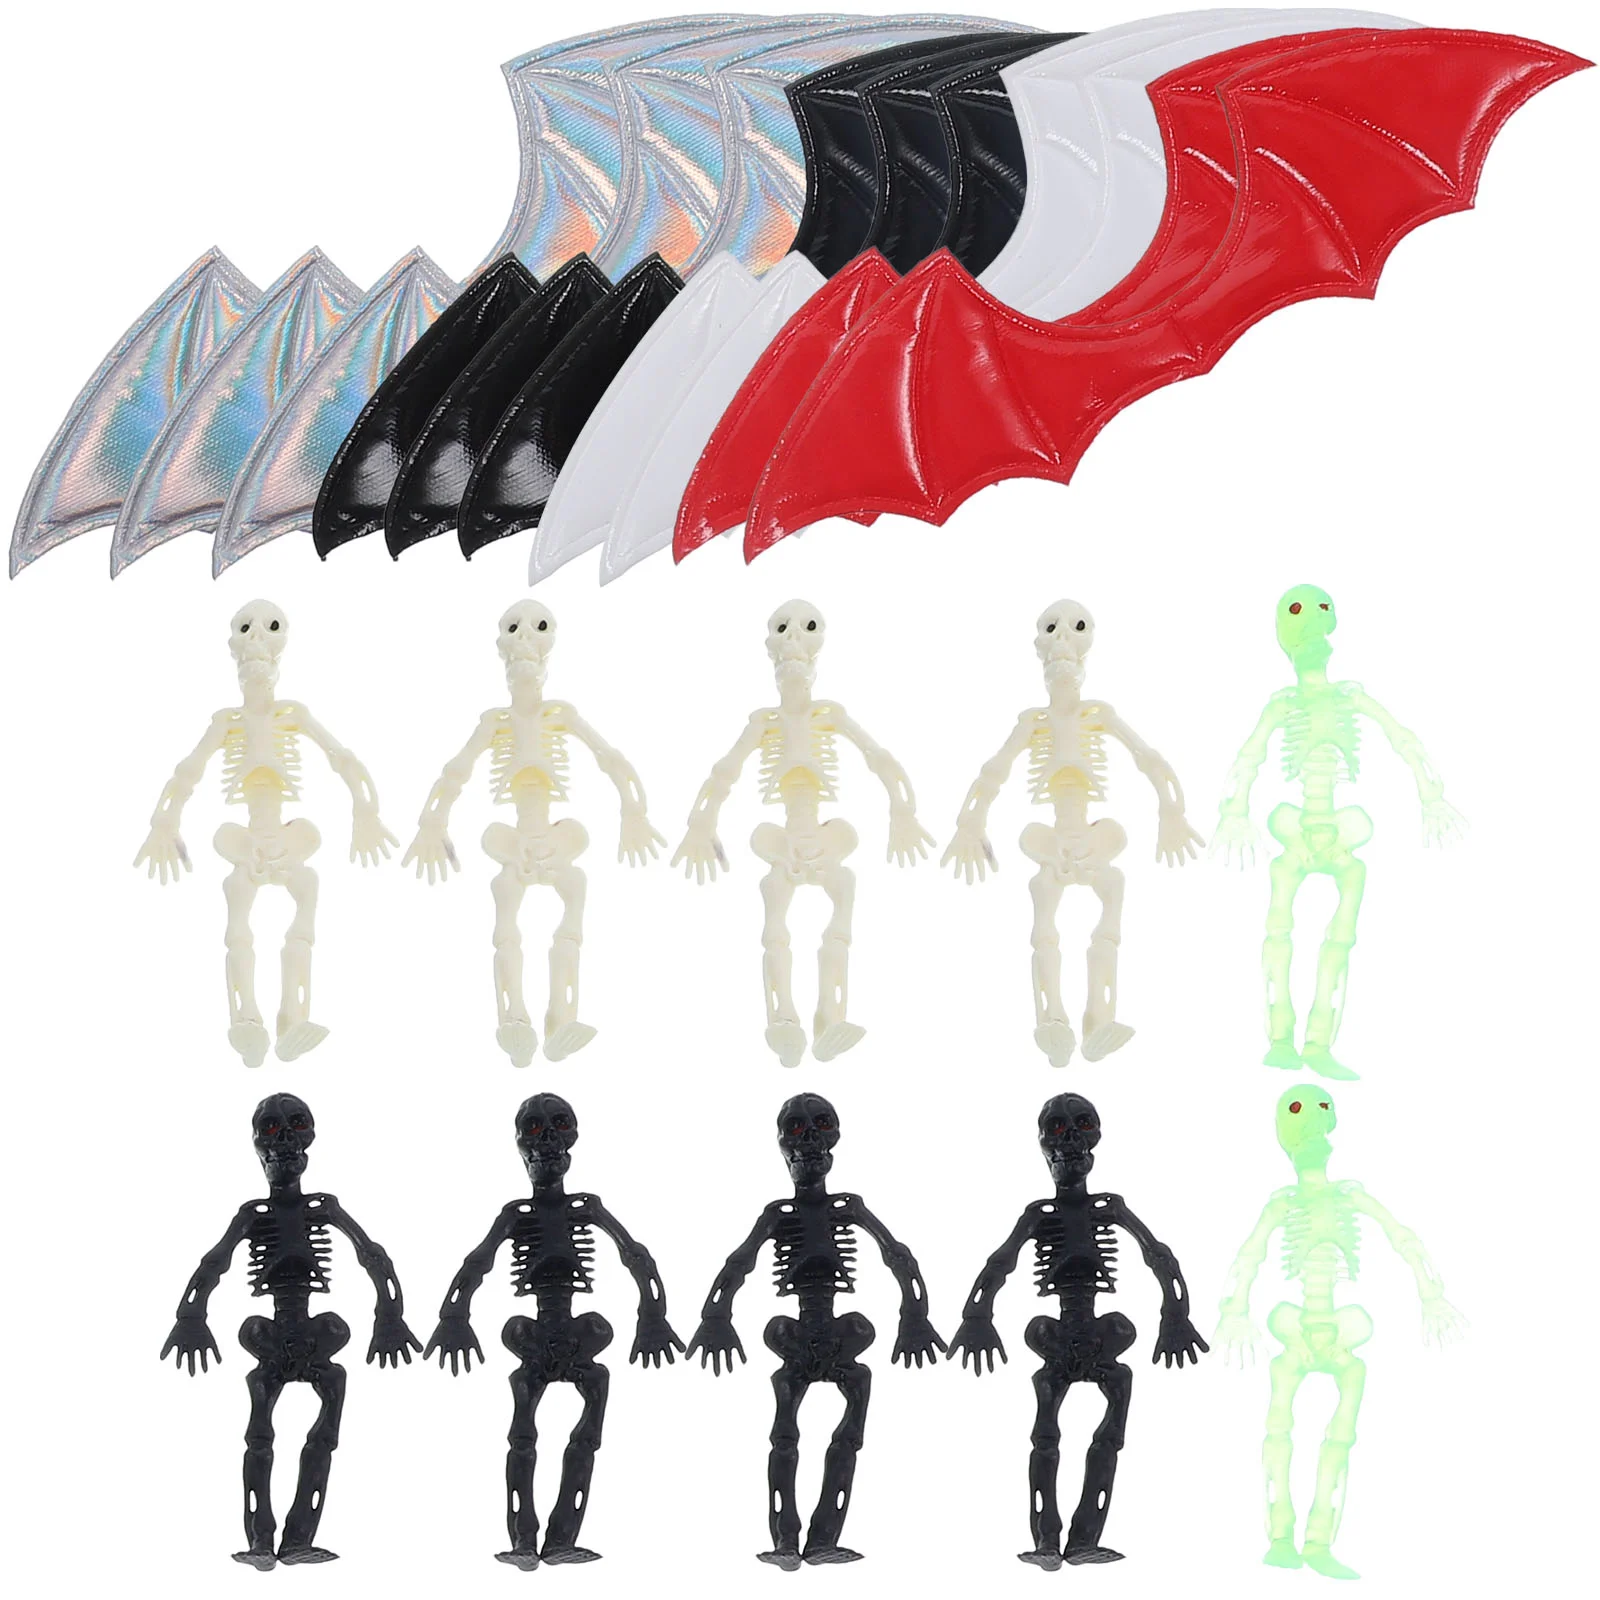 1 Set of Clothing Accessories Bat Wing Accessories